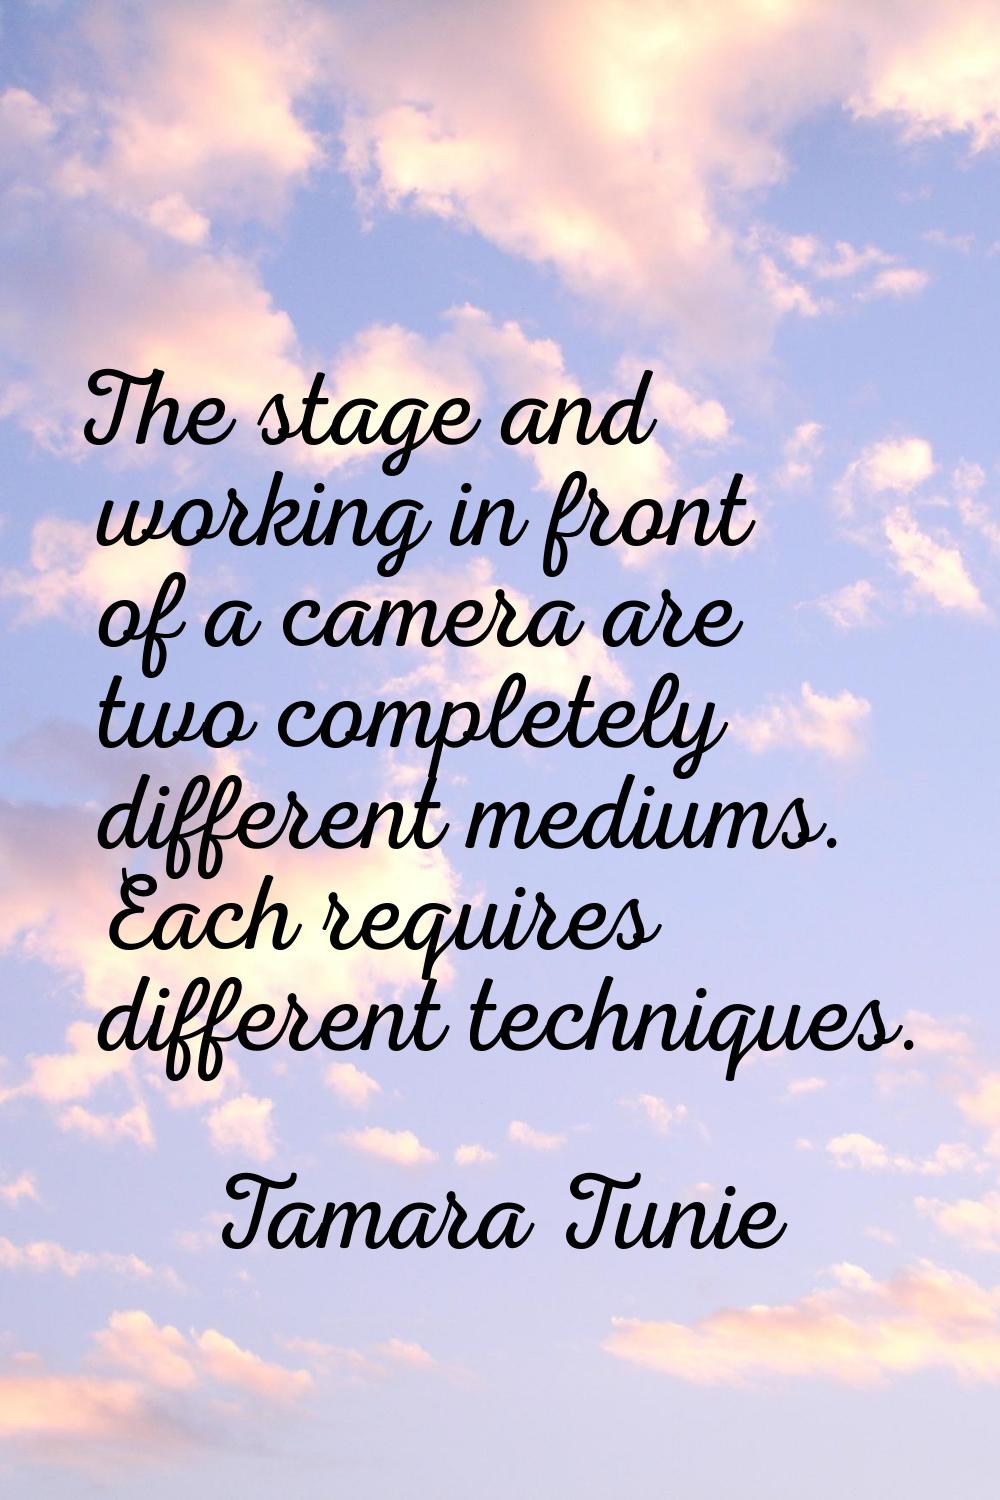 The stage and working in front of a camera are two completely different mediums. Each requires diff